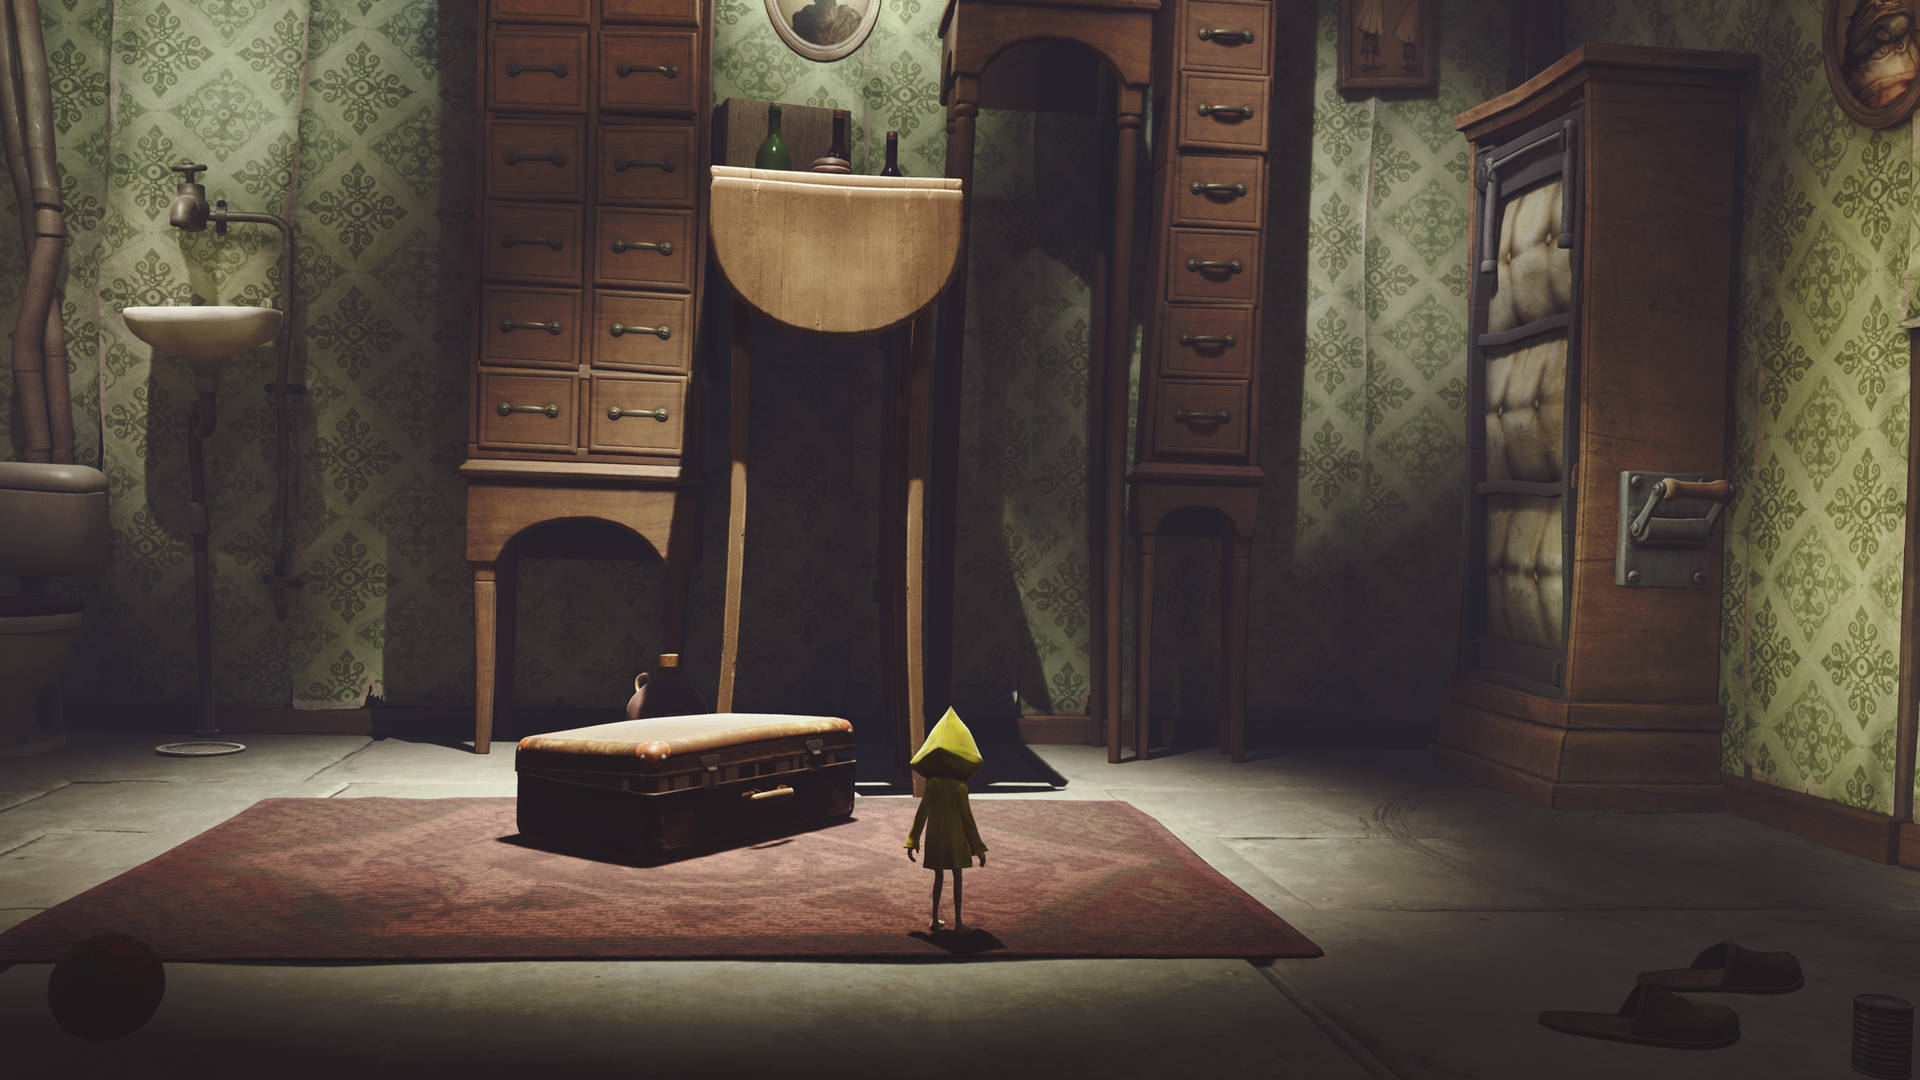 Little Nightmares The Janitor's Room Background